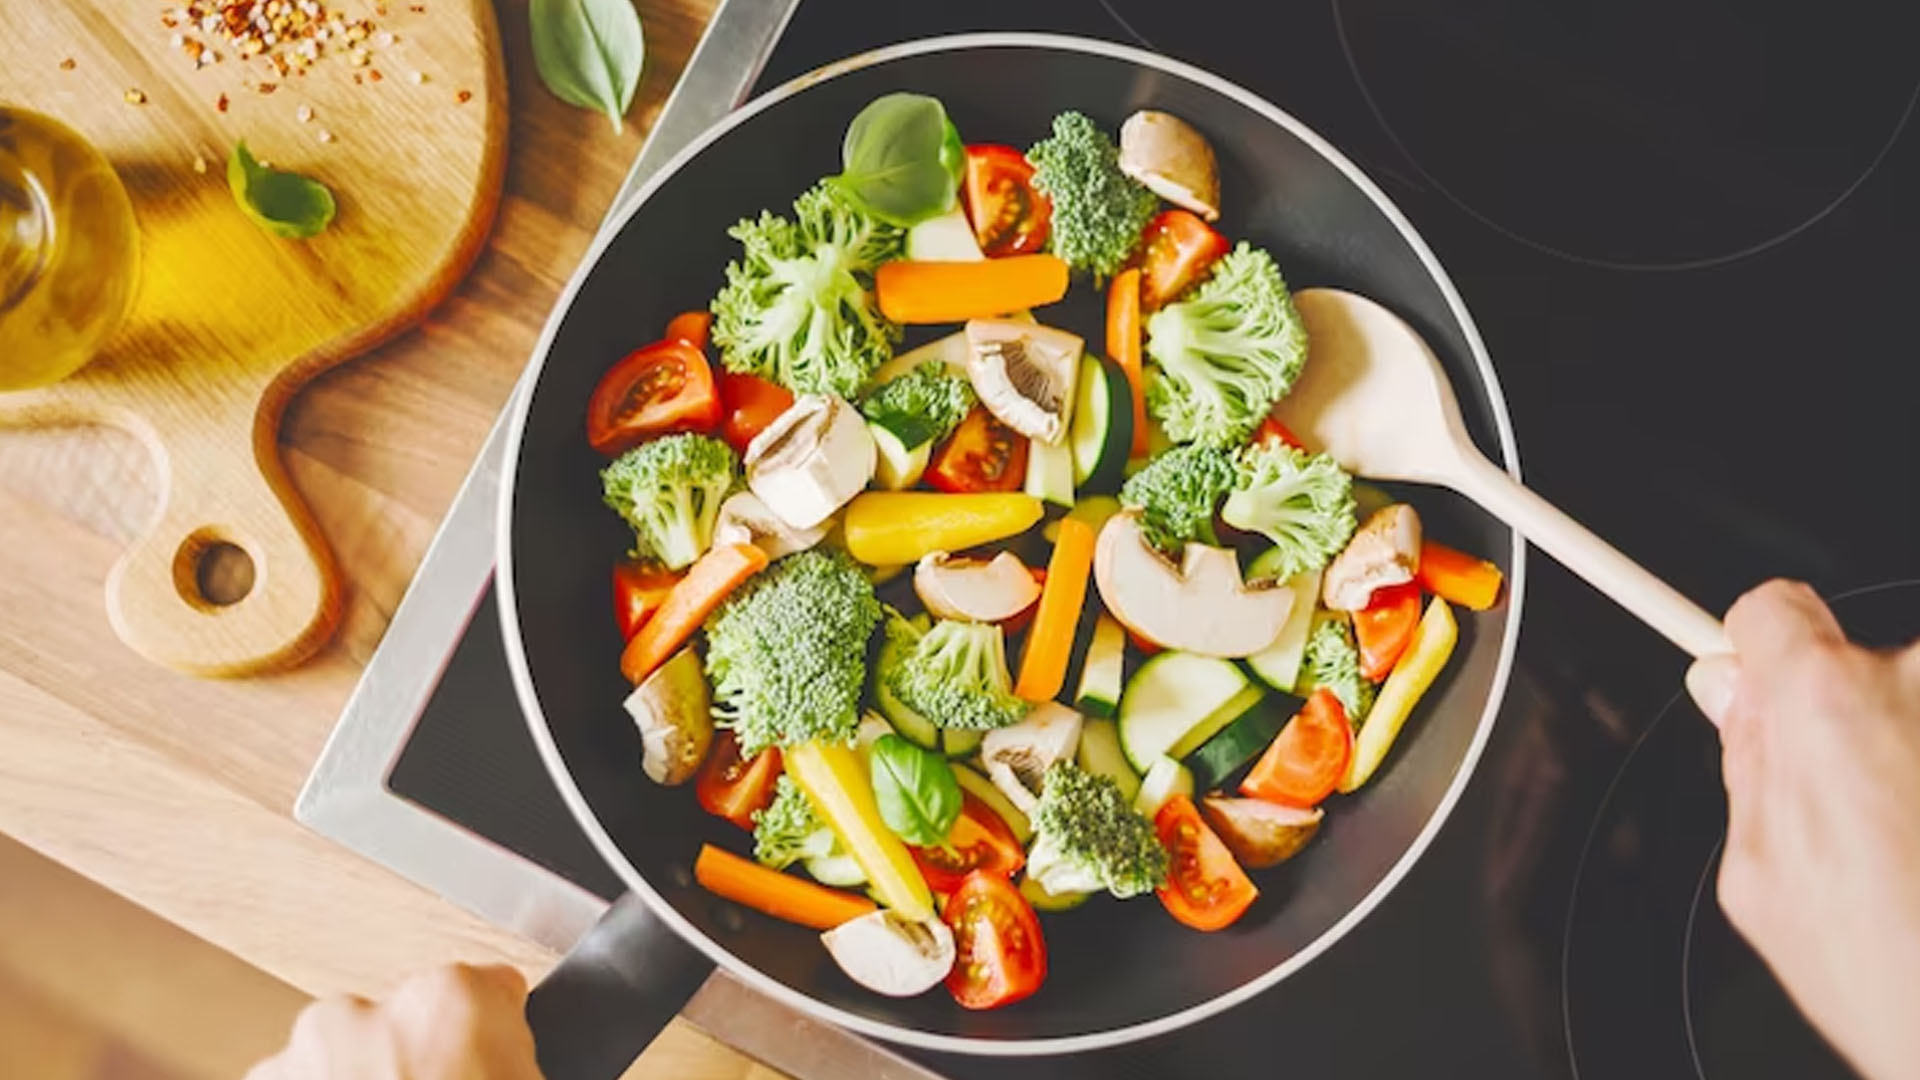 How To Cook Vegetables For Health Benefits?